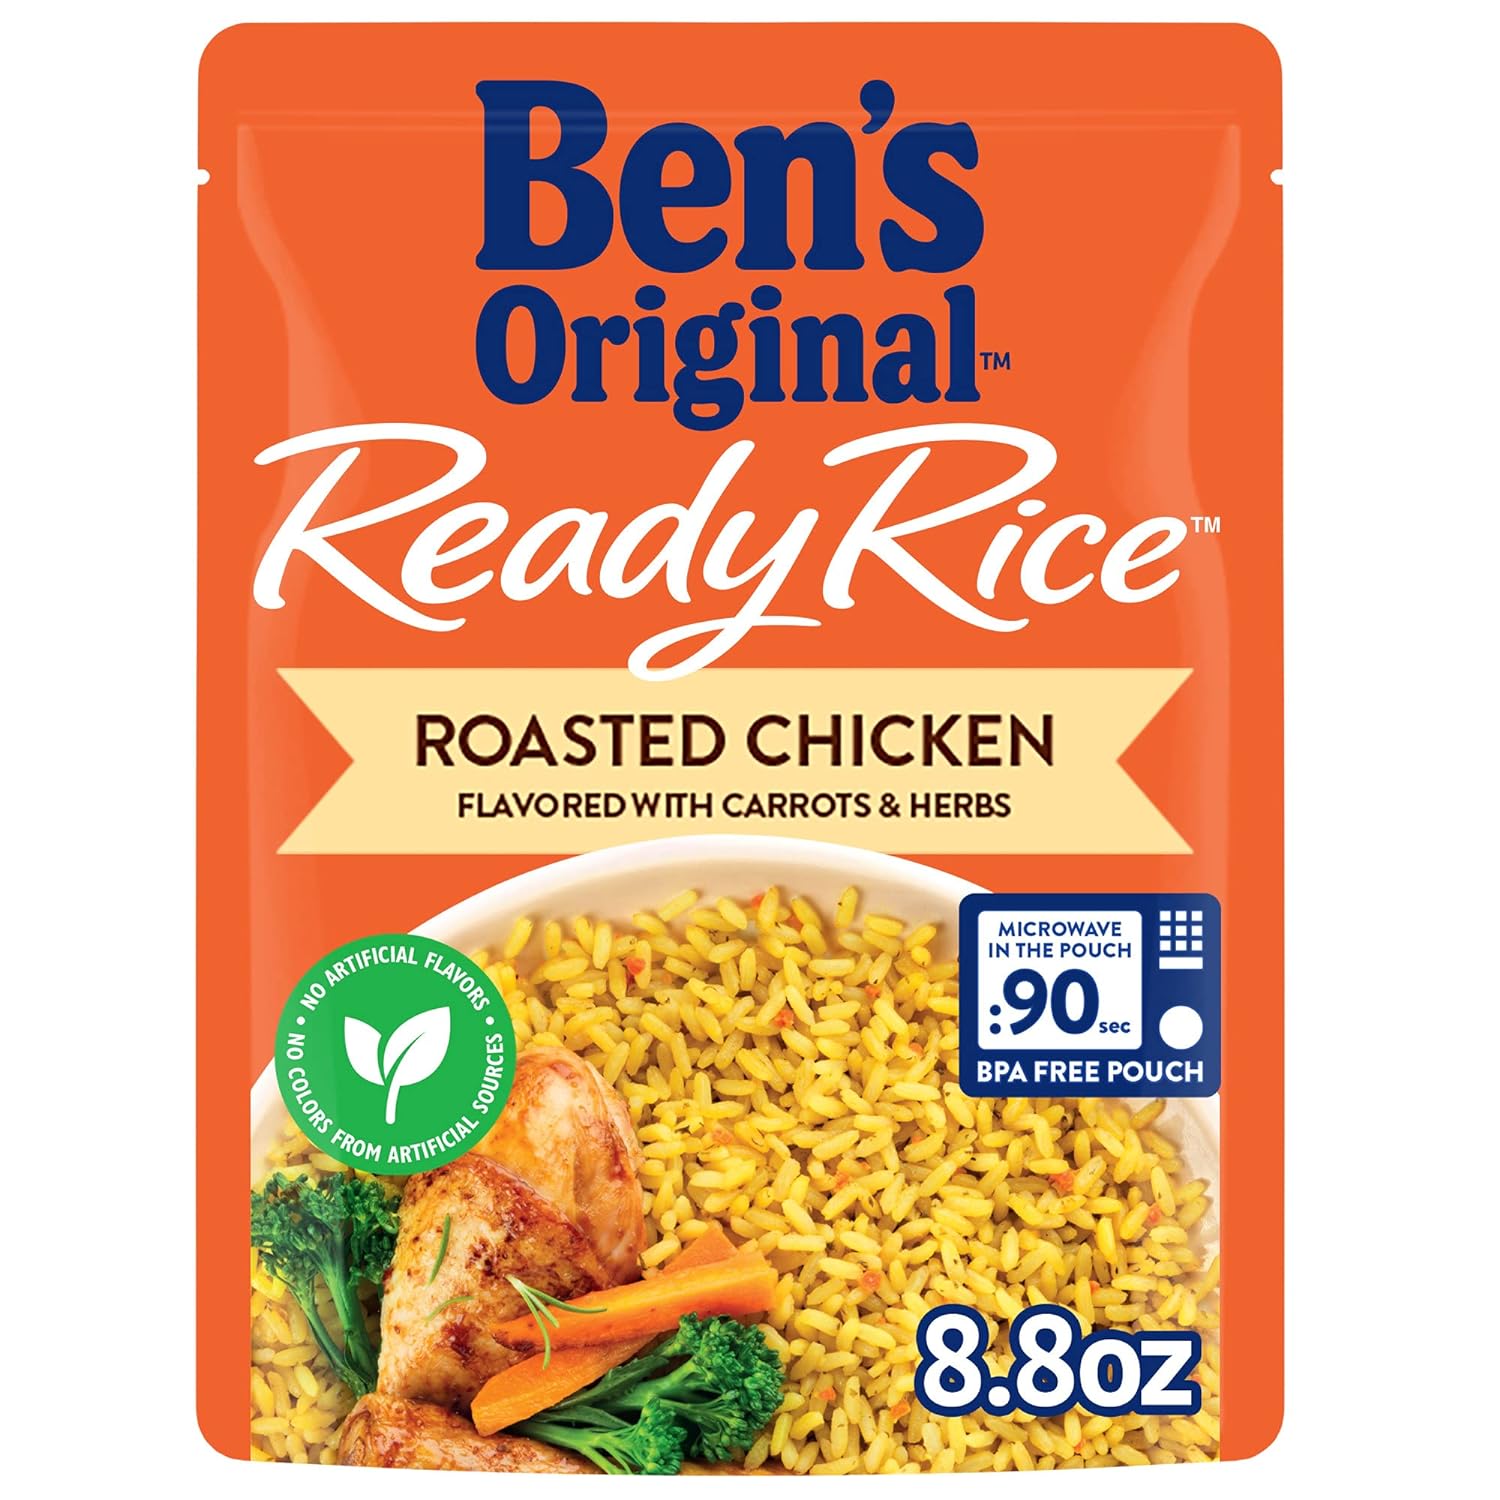 BEN'S ORIGINAL Ready Rice Roasted Chicken Flavored Rice, Easy Dinner Side, 8.8 OZ Pouch (Pack of 12)